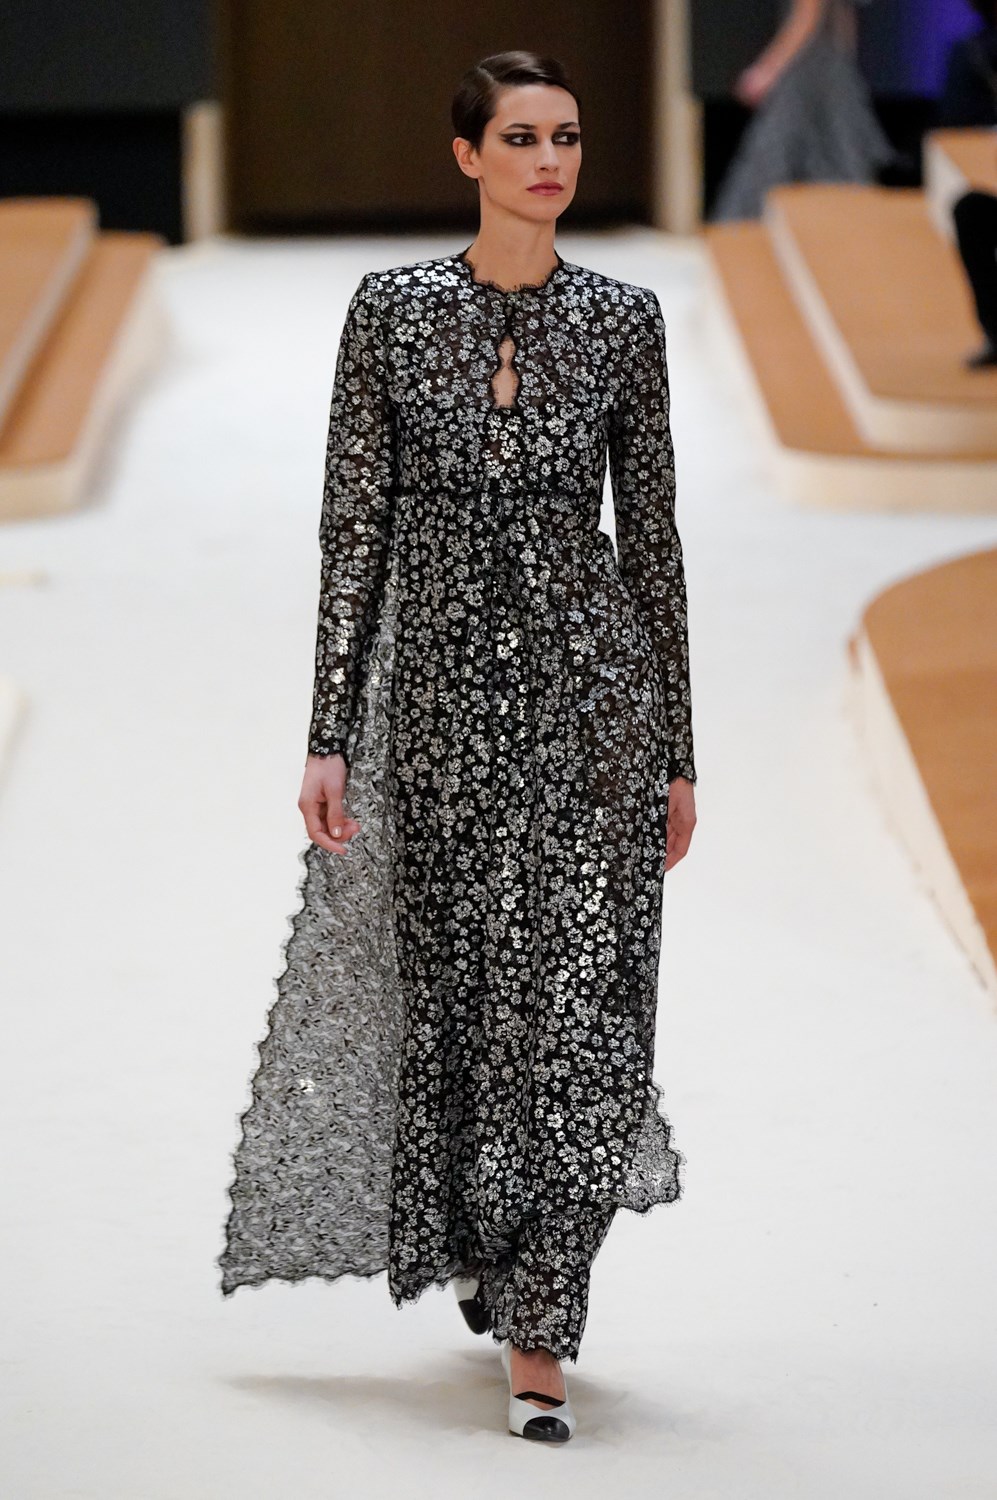 Chanel Spring 2022 Couture Fashion Show